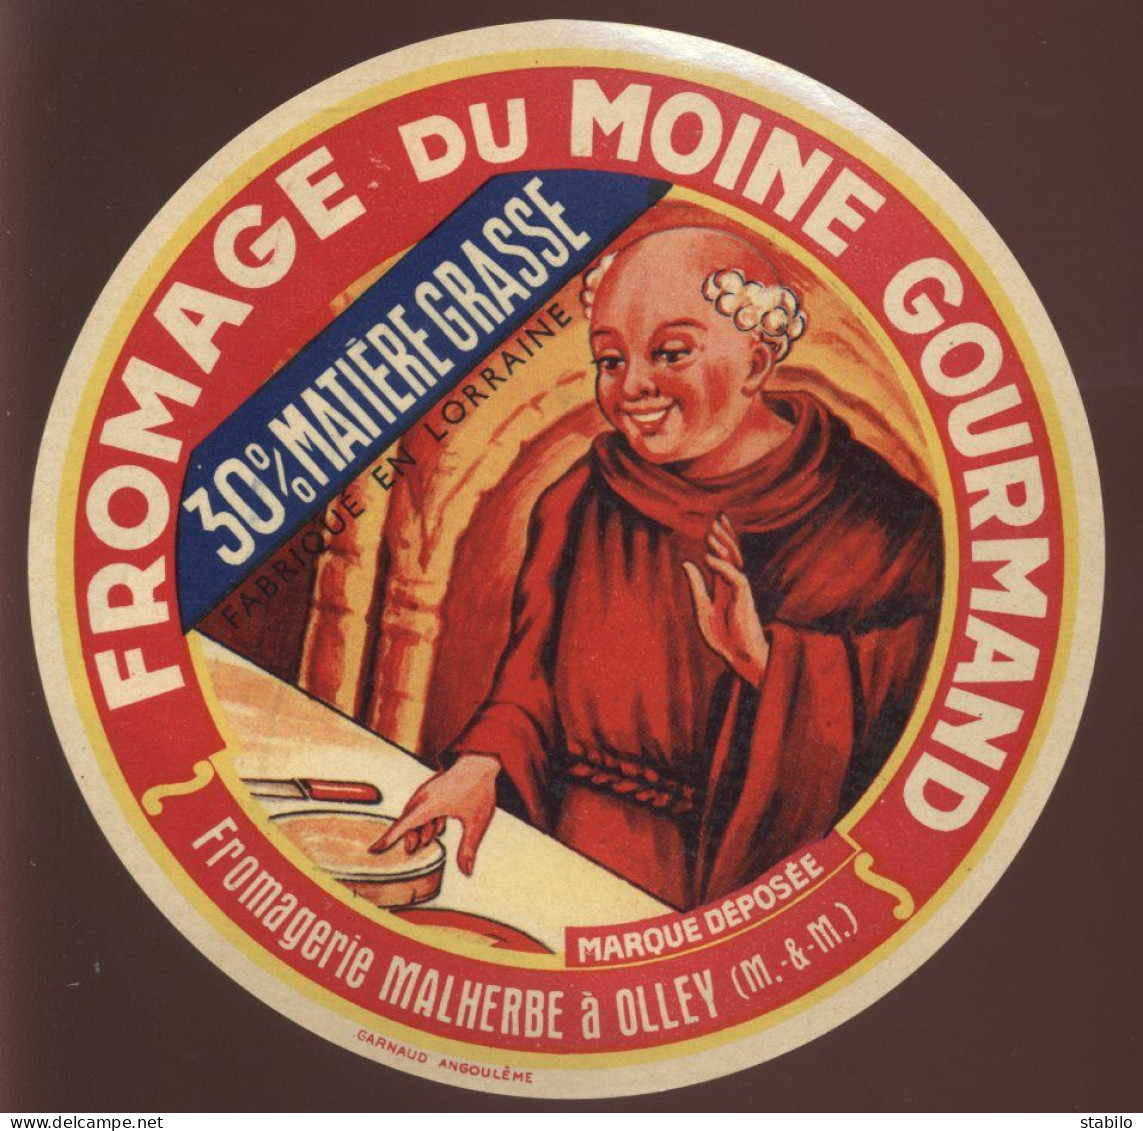 ETIQUETTE DE FROMAGE - FROMAGE DU MOINE GOURMAND - FROMAGERIE MALHERBE, OLLEY (MEURTHE-ET-MOSELLE) - Kaas